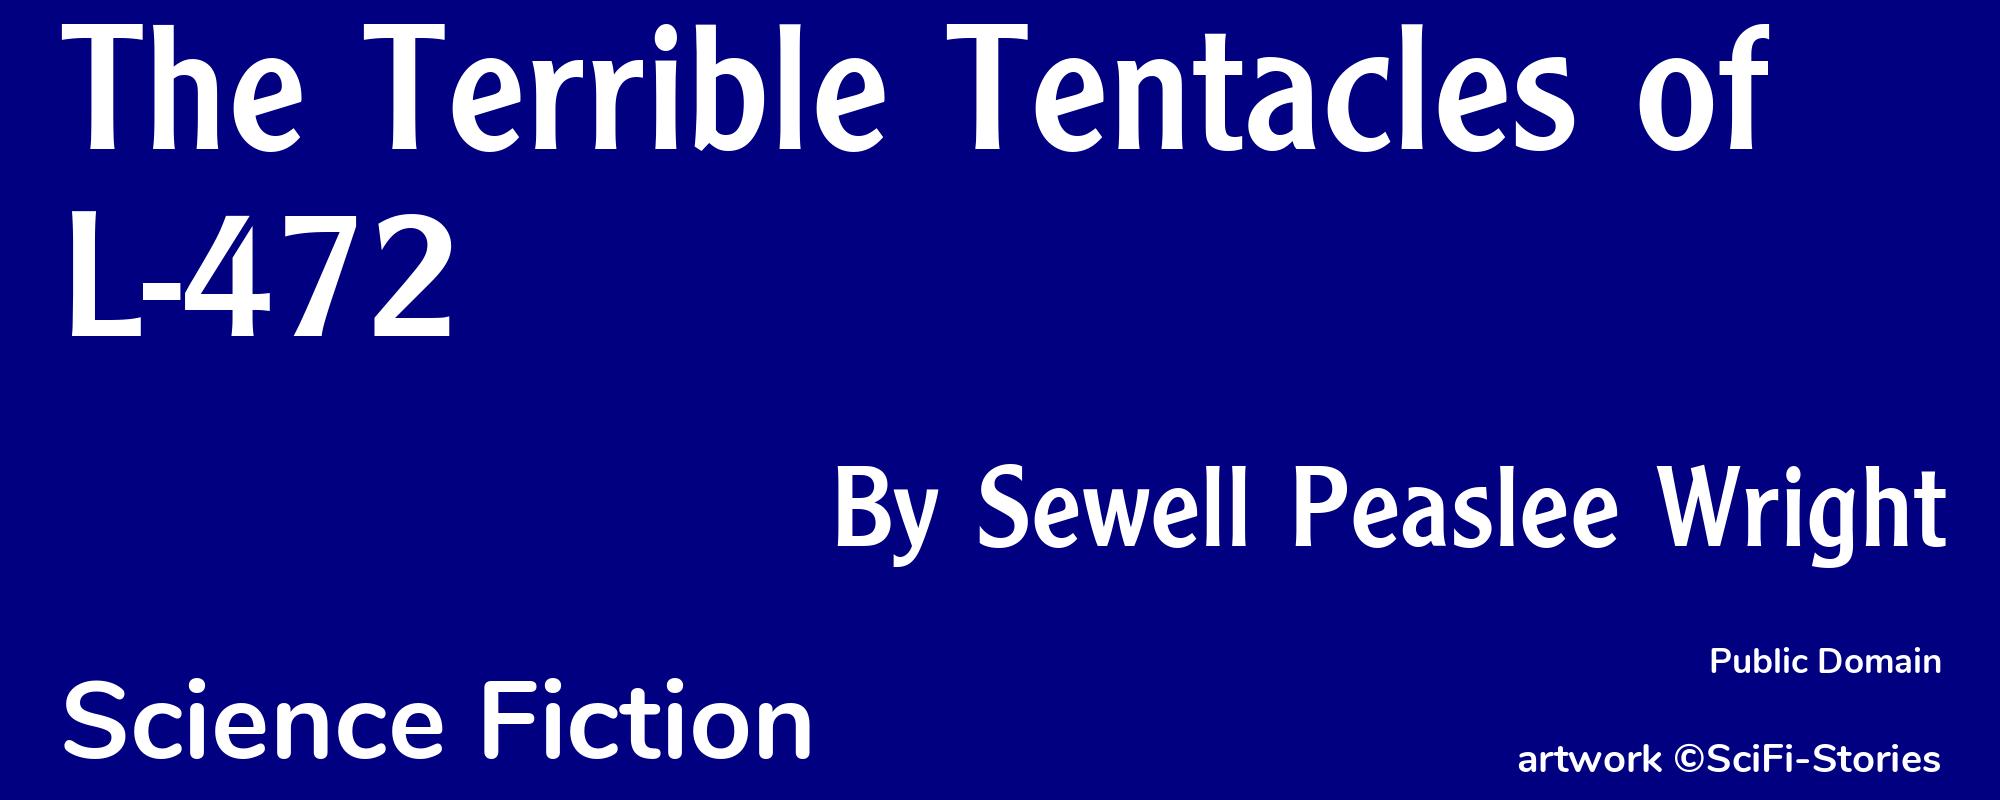 The Terrible Tentacles of L-472 - Cover